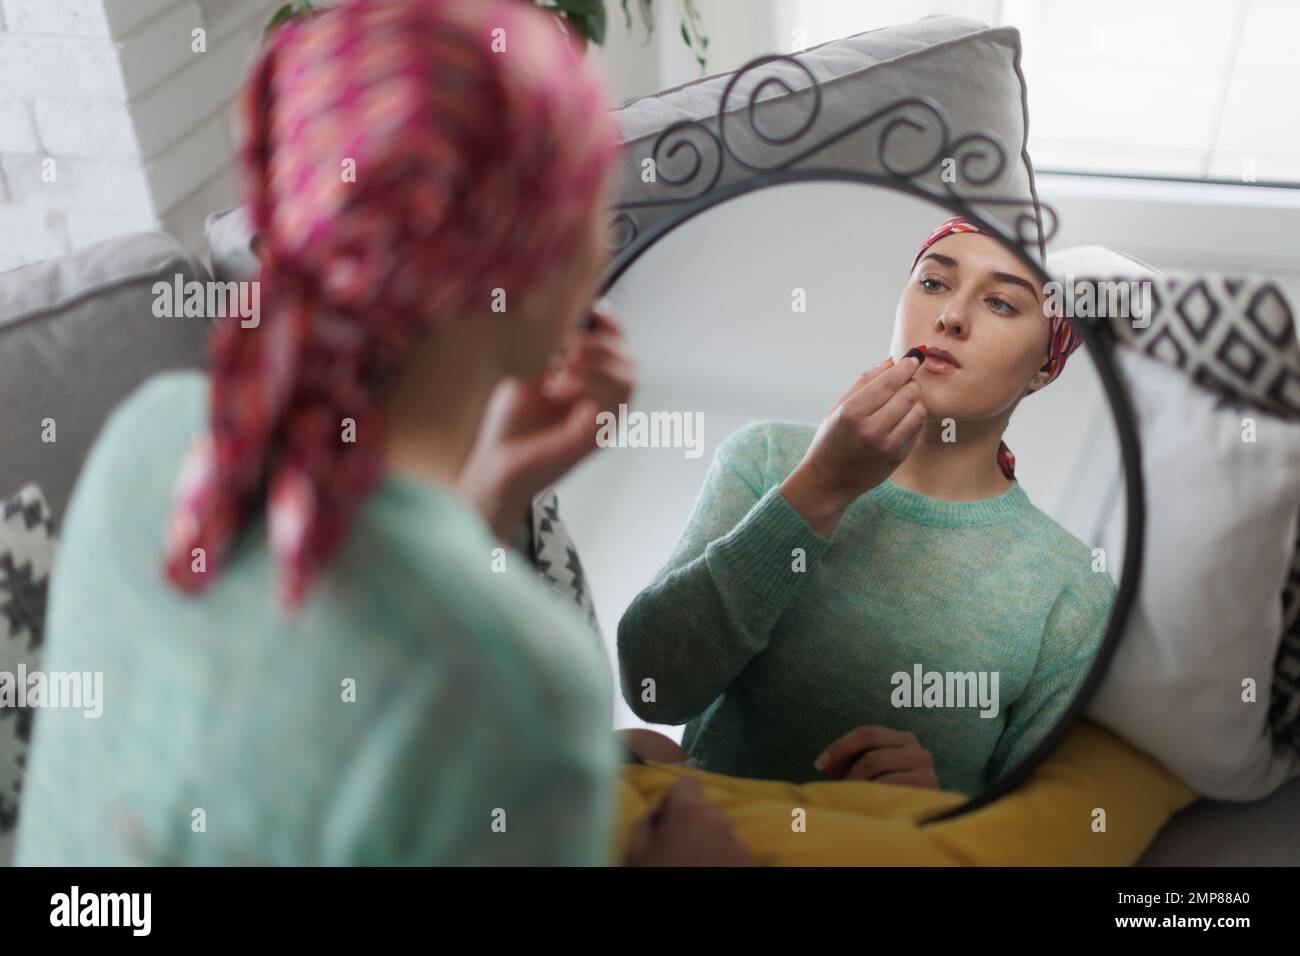 Beauty routine of young woman with cancer. Stock Photo